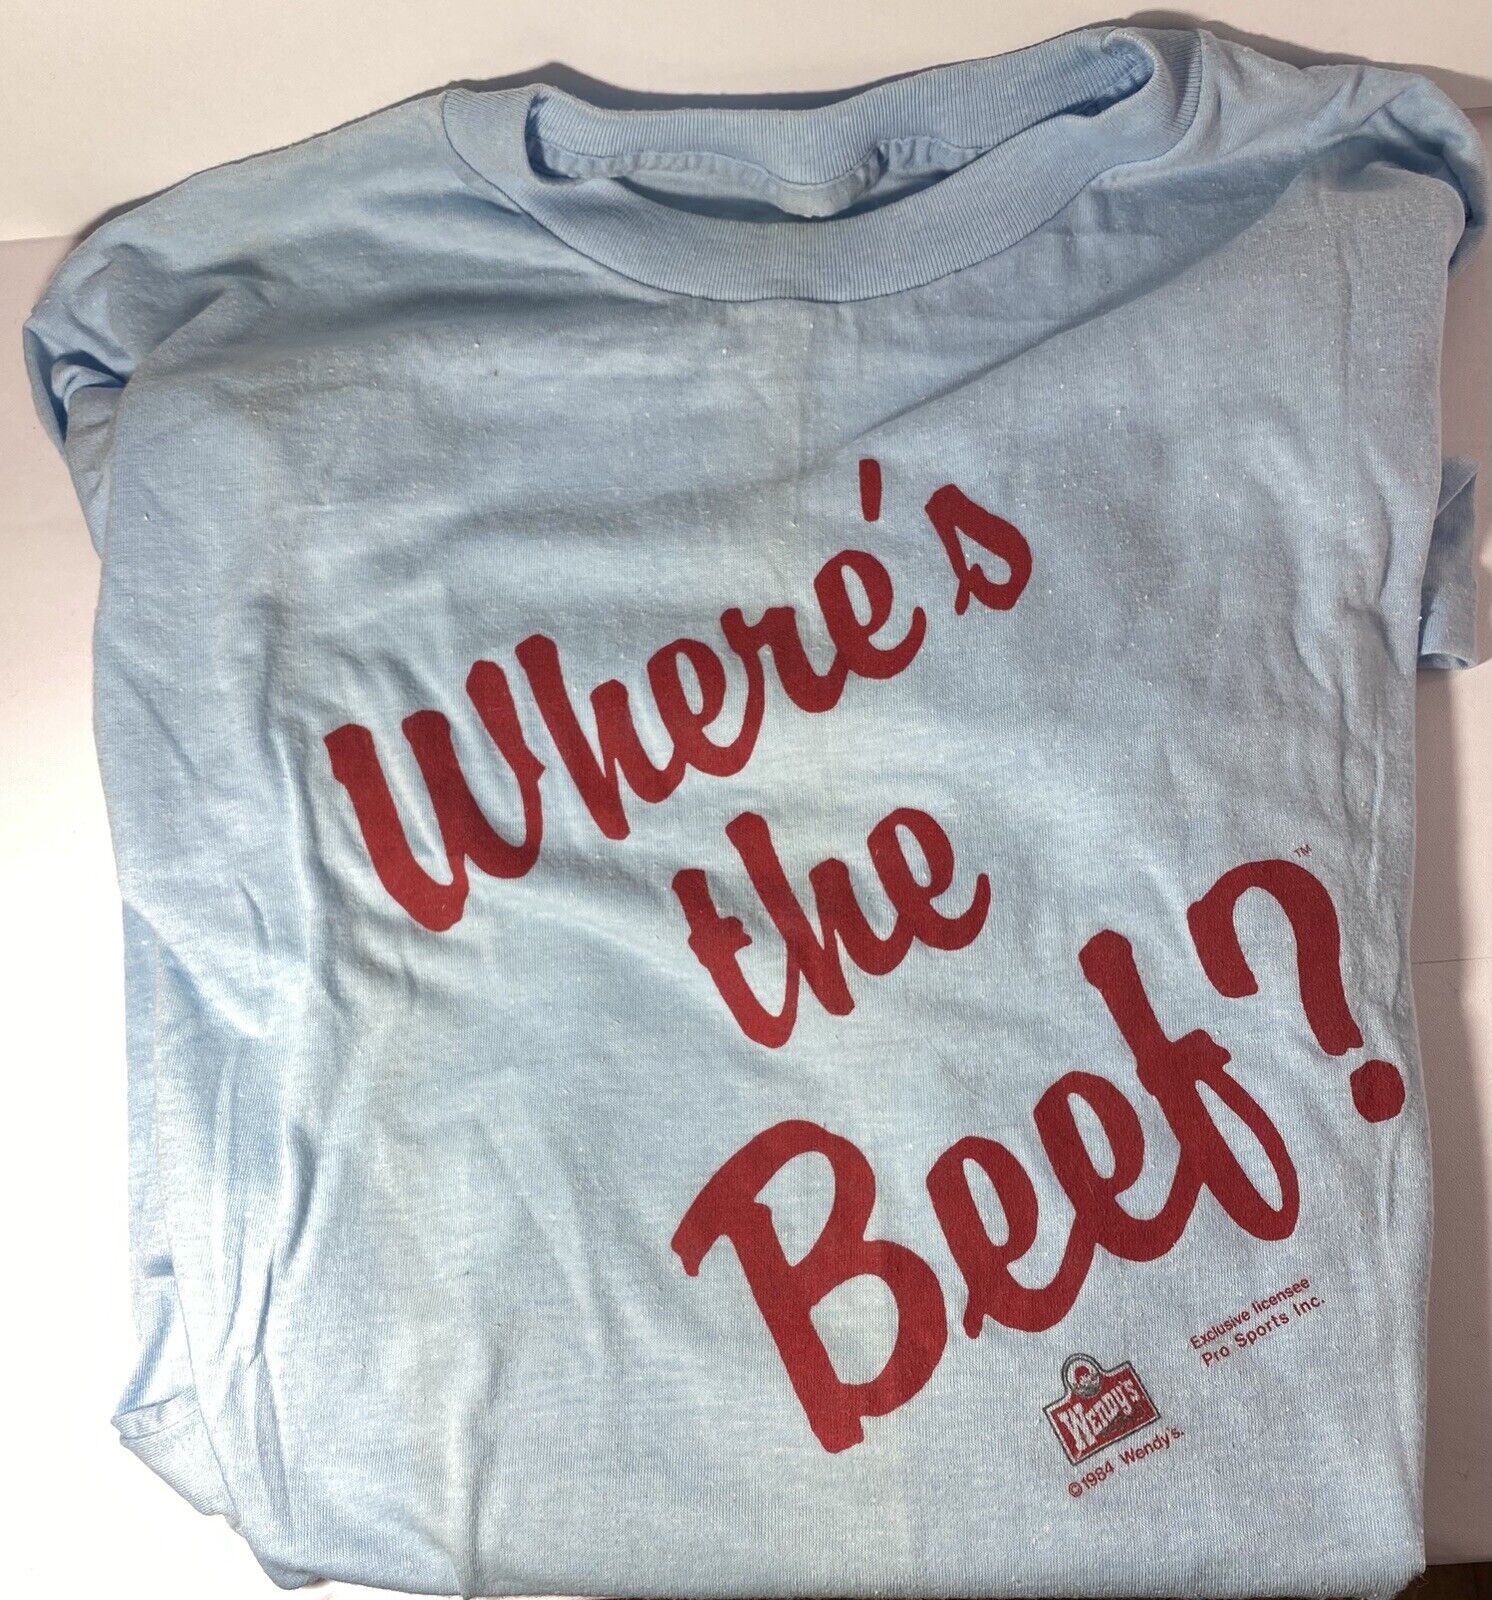 Vintage 1980s Wendy’s “Where’s the Beef?”  Advertisement Shirt Blue 1984